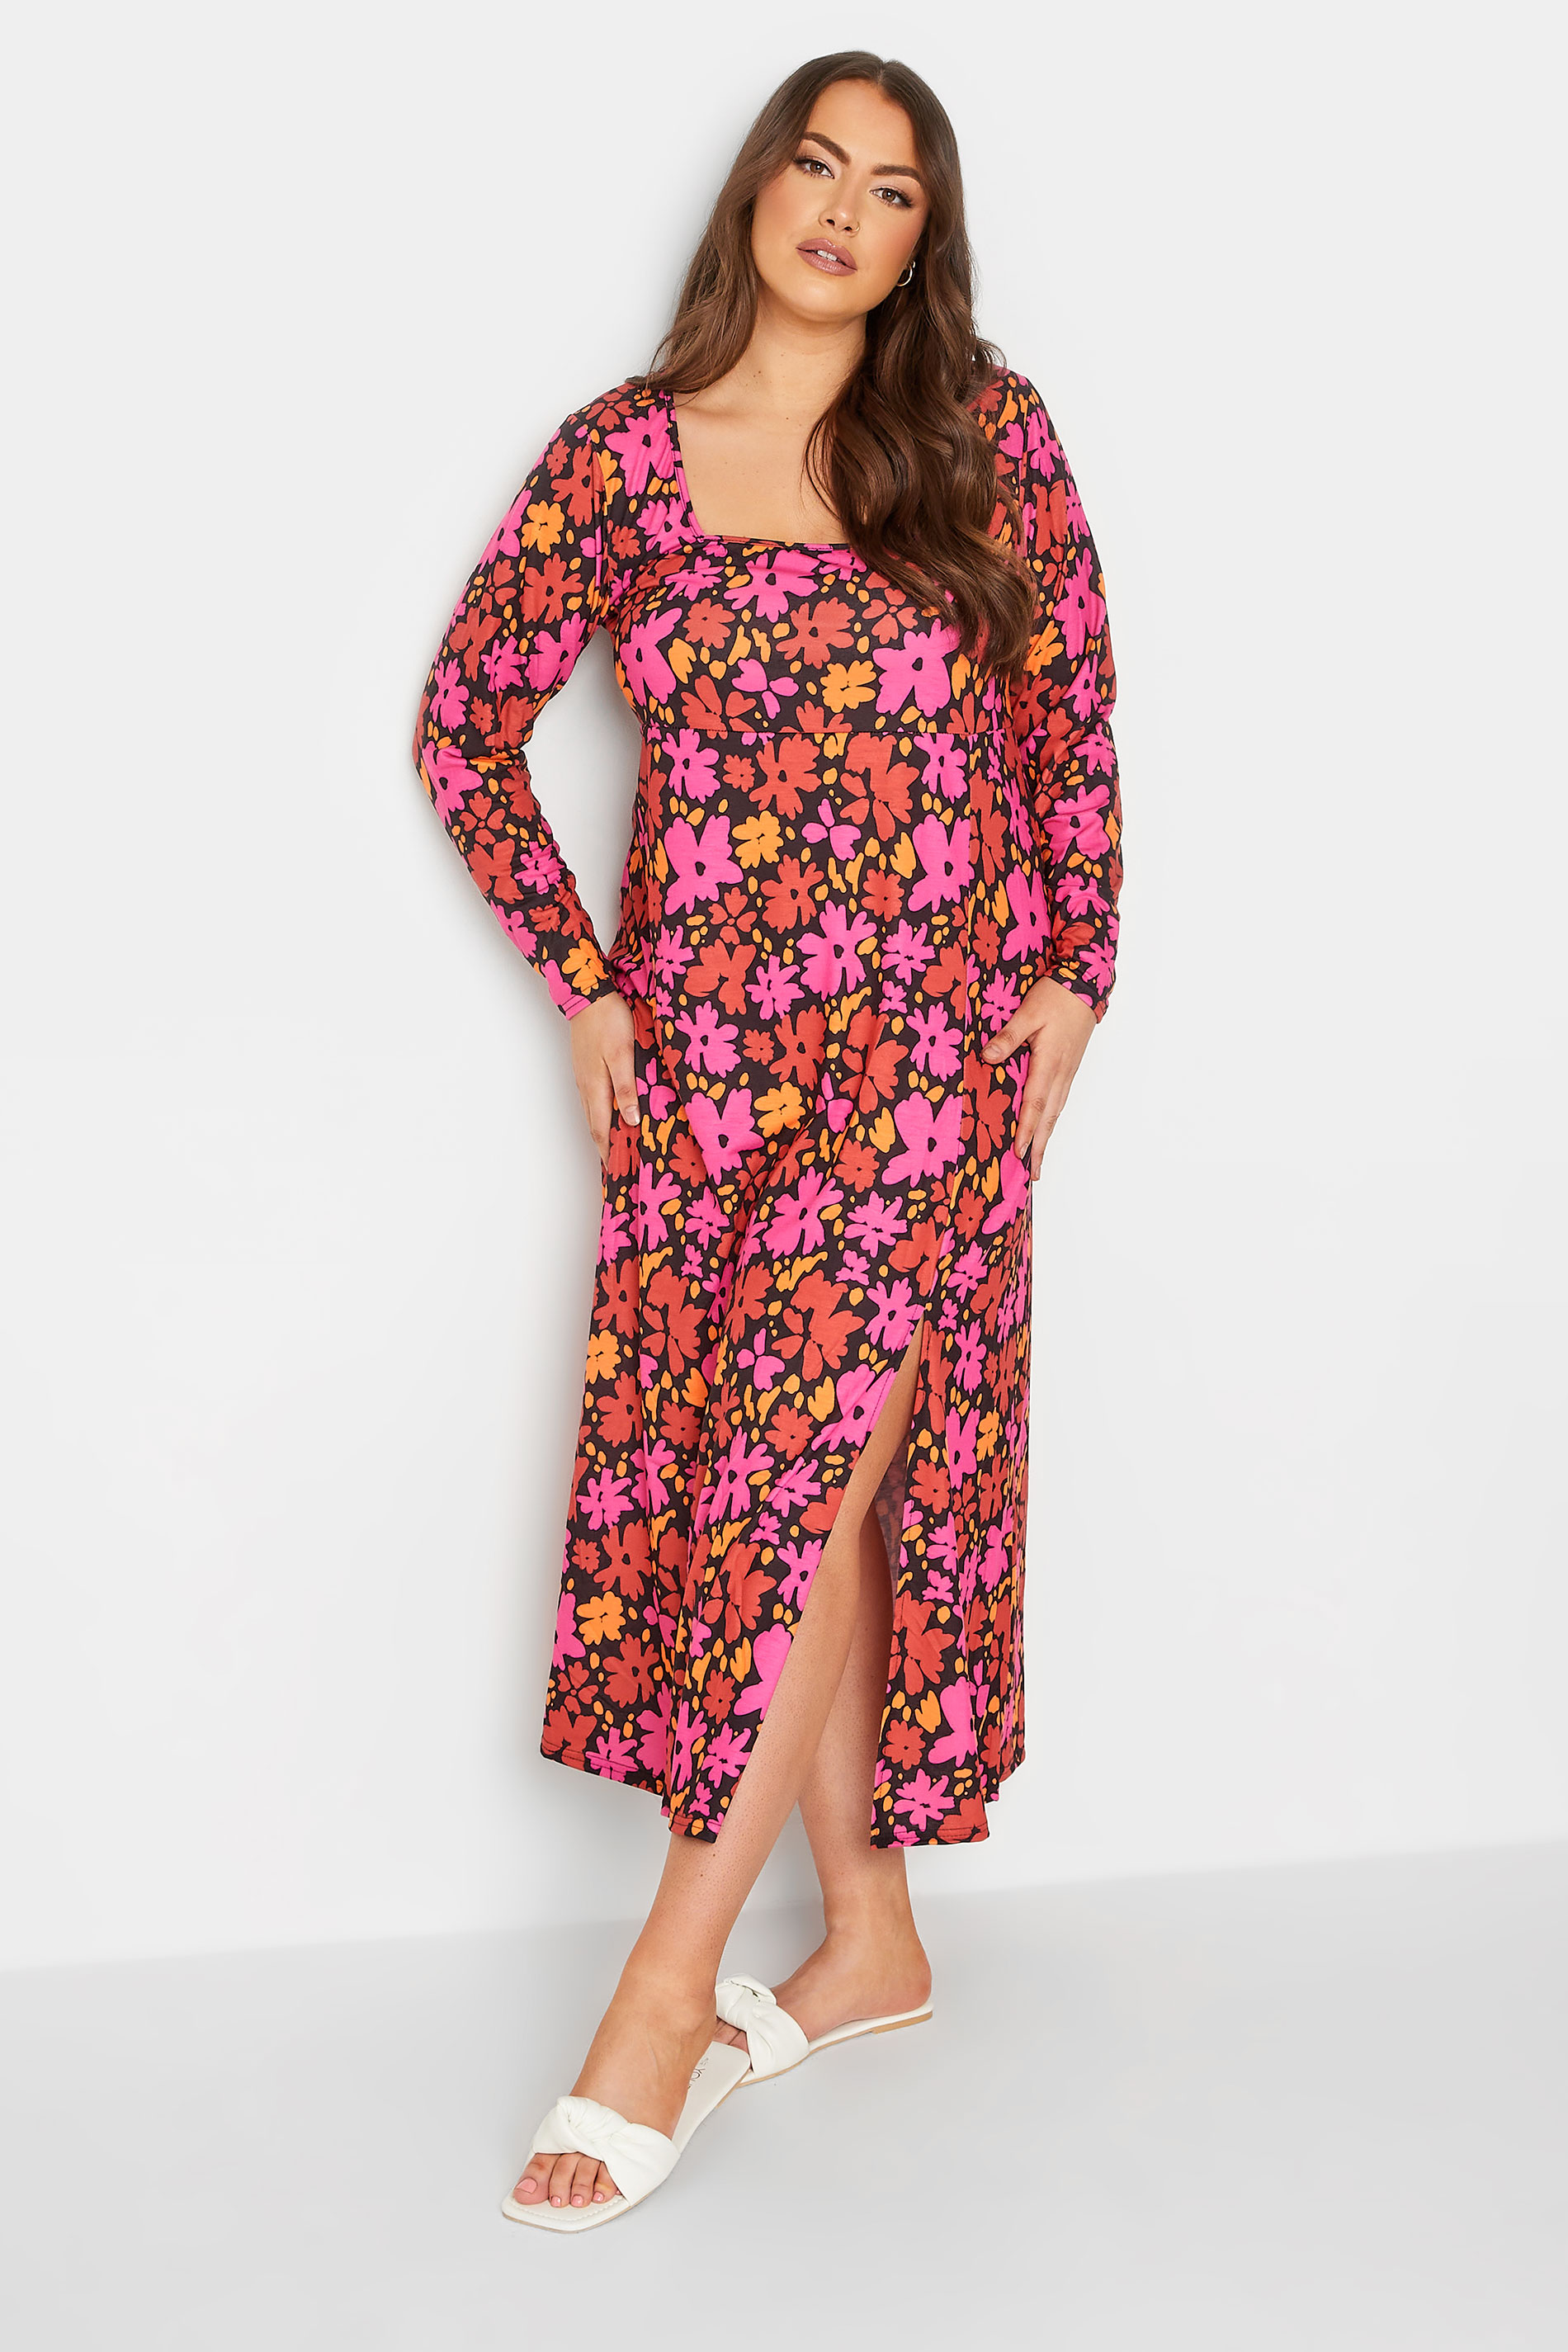 LIMITED COLLECTION Curve Red Floral Square Neck Dress | Yours Clothing 1